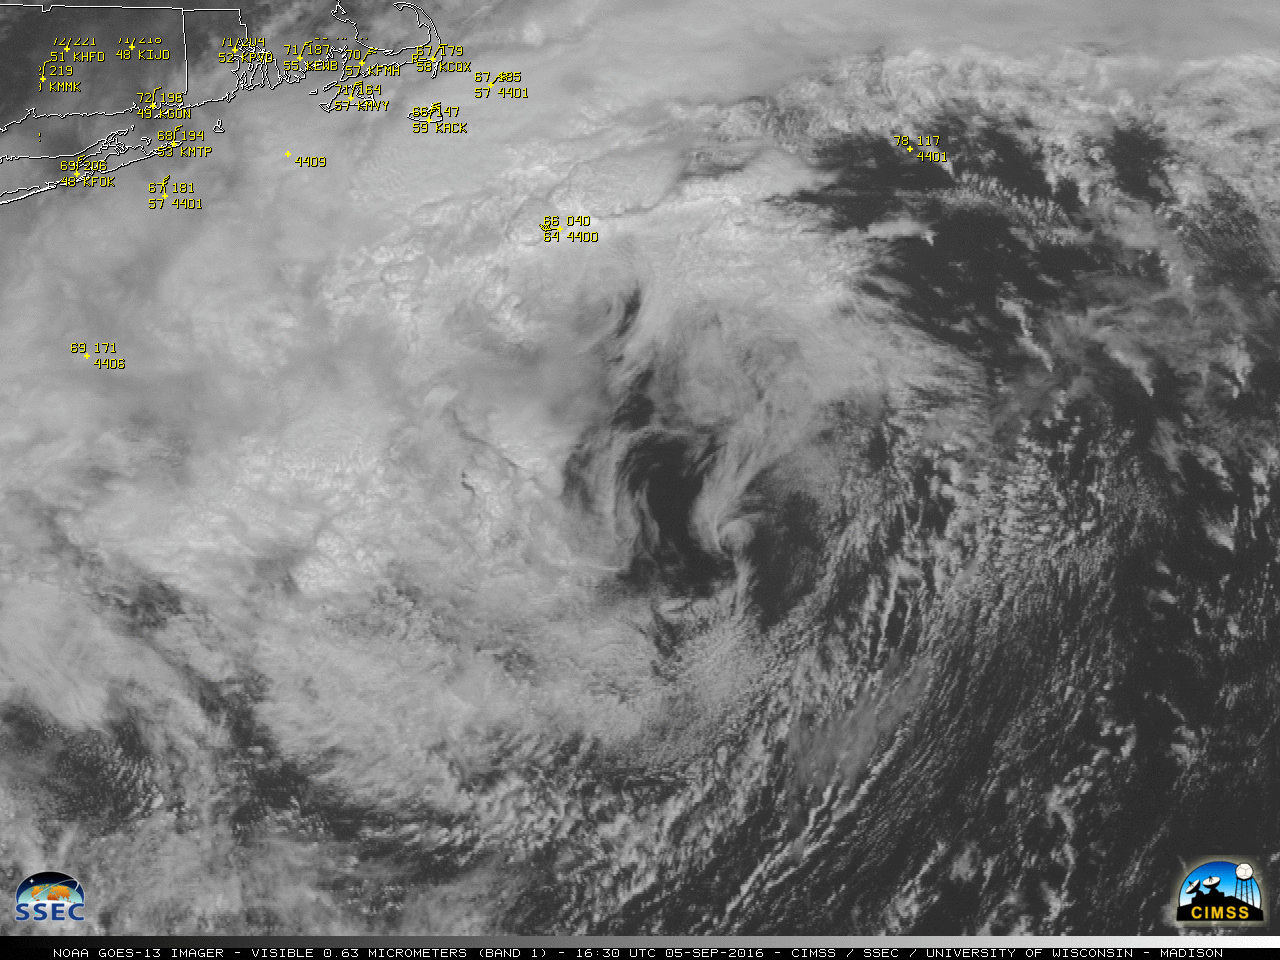 GOES-13 Visible (0.63 µm) images, with buoy/ship reports plotted in yellow [click to play animation]